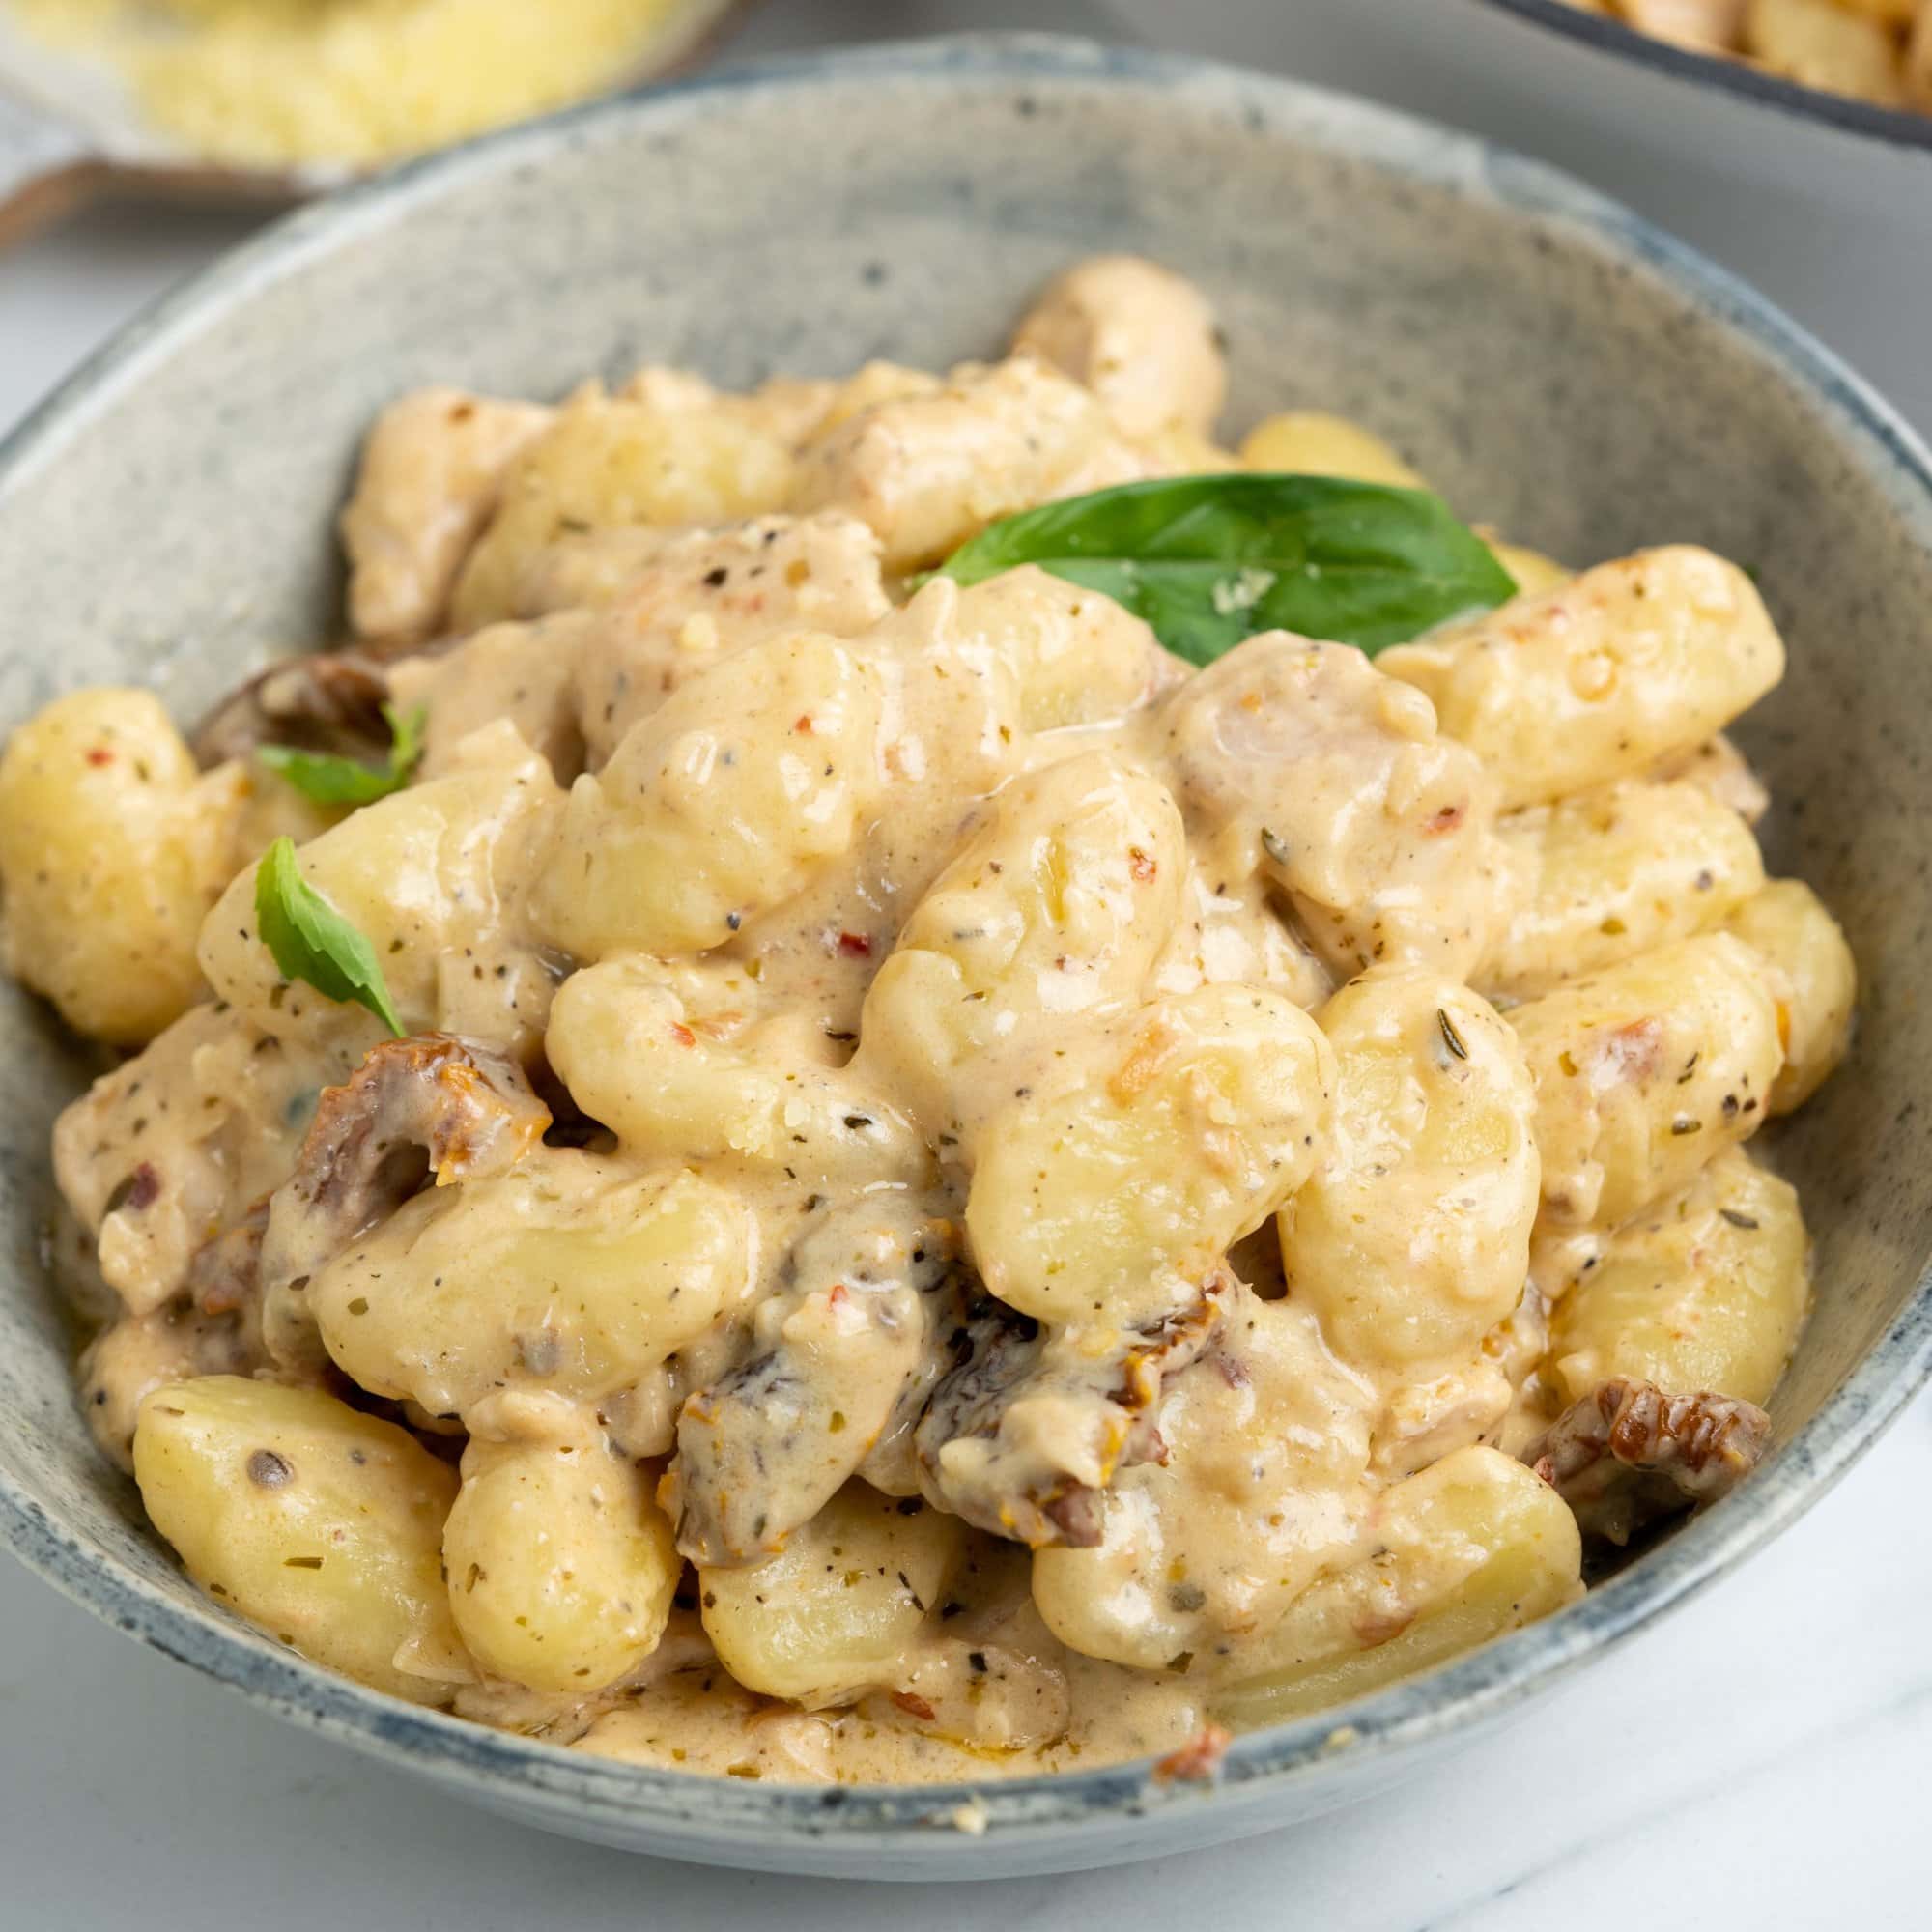 chicken breast, gnocchi in a creamy parmesan sauce with sundried tomatoes, Italian basil.